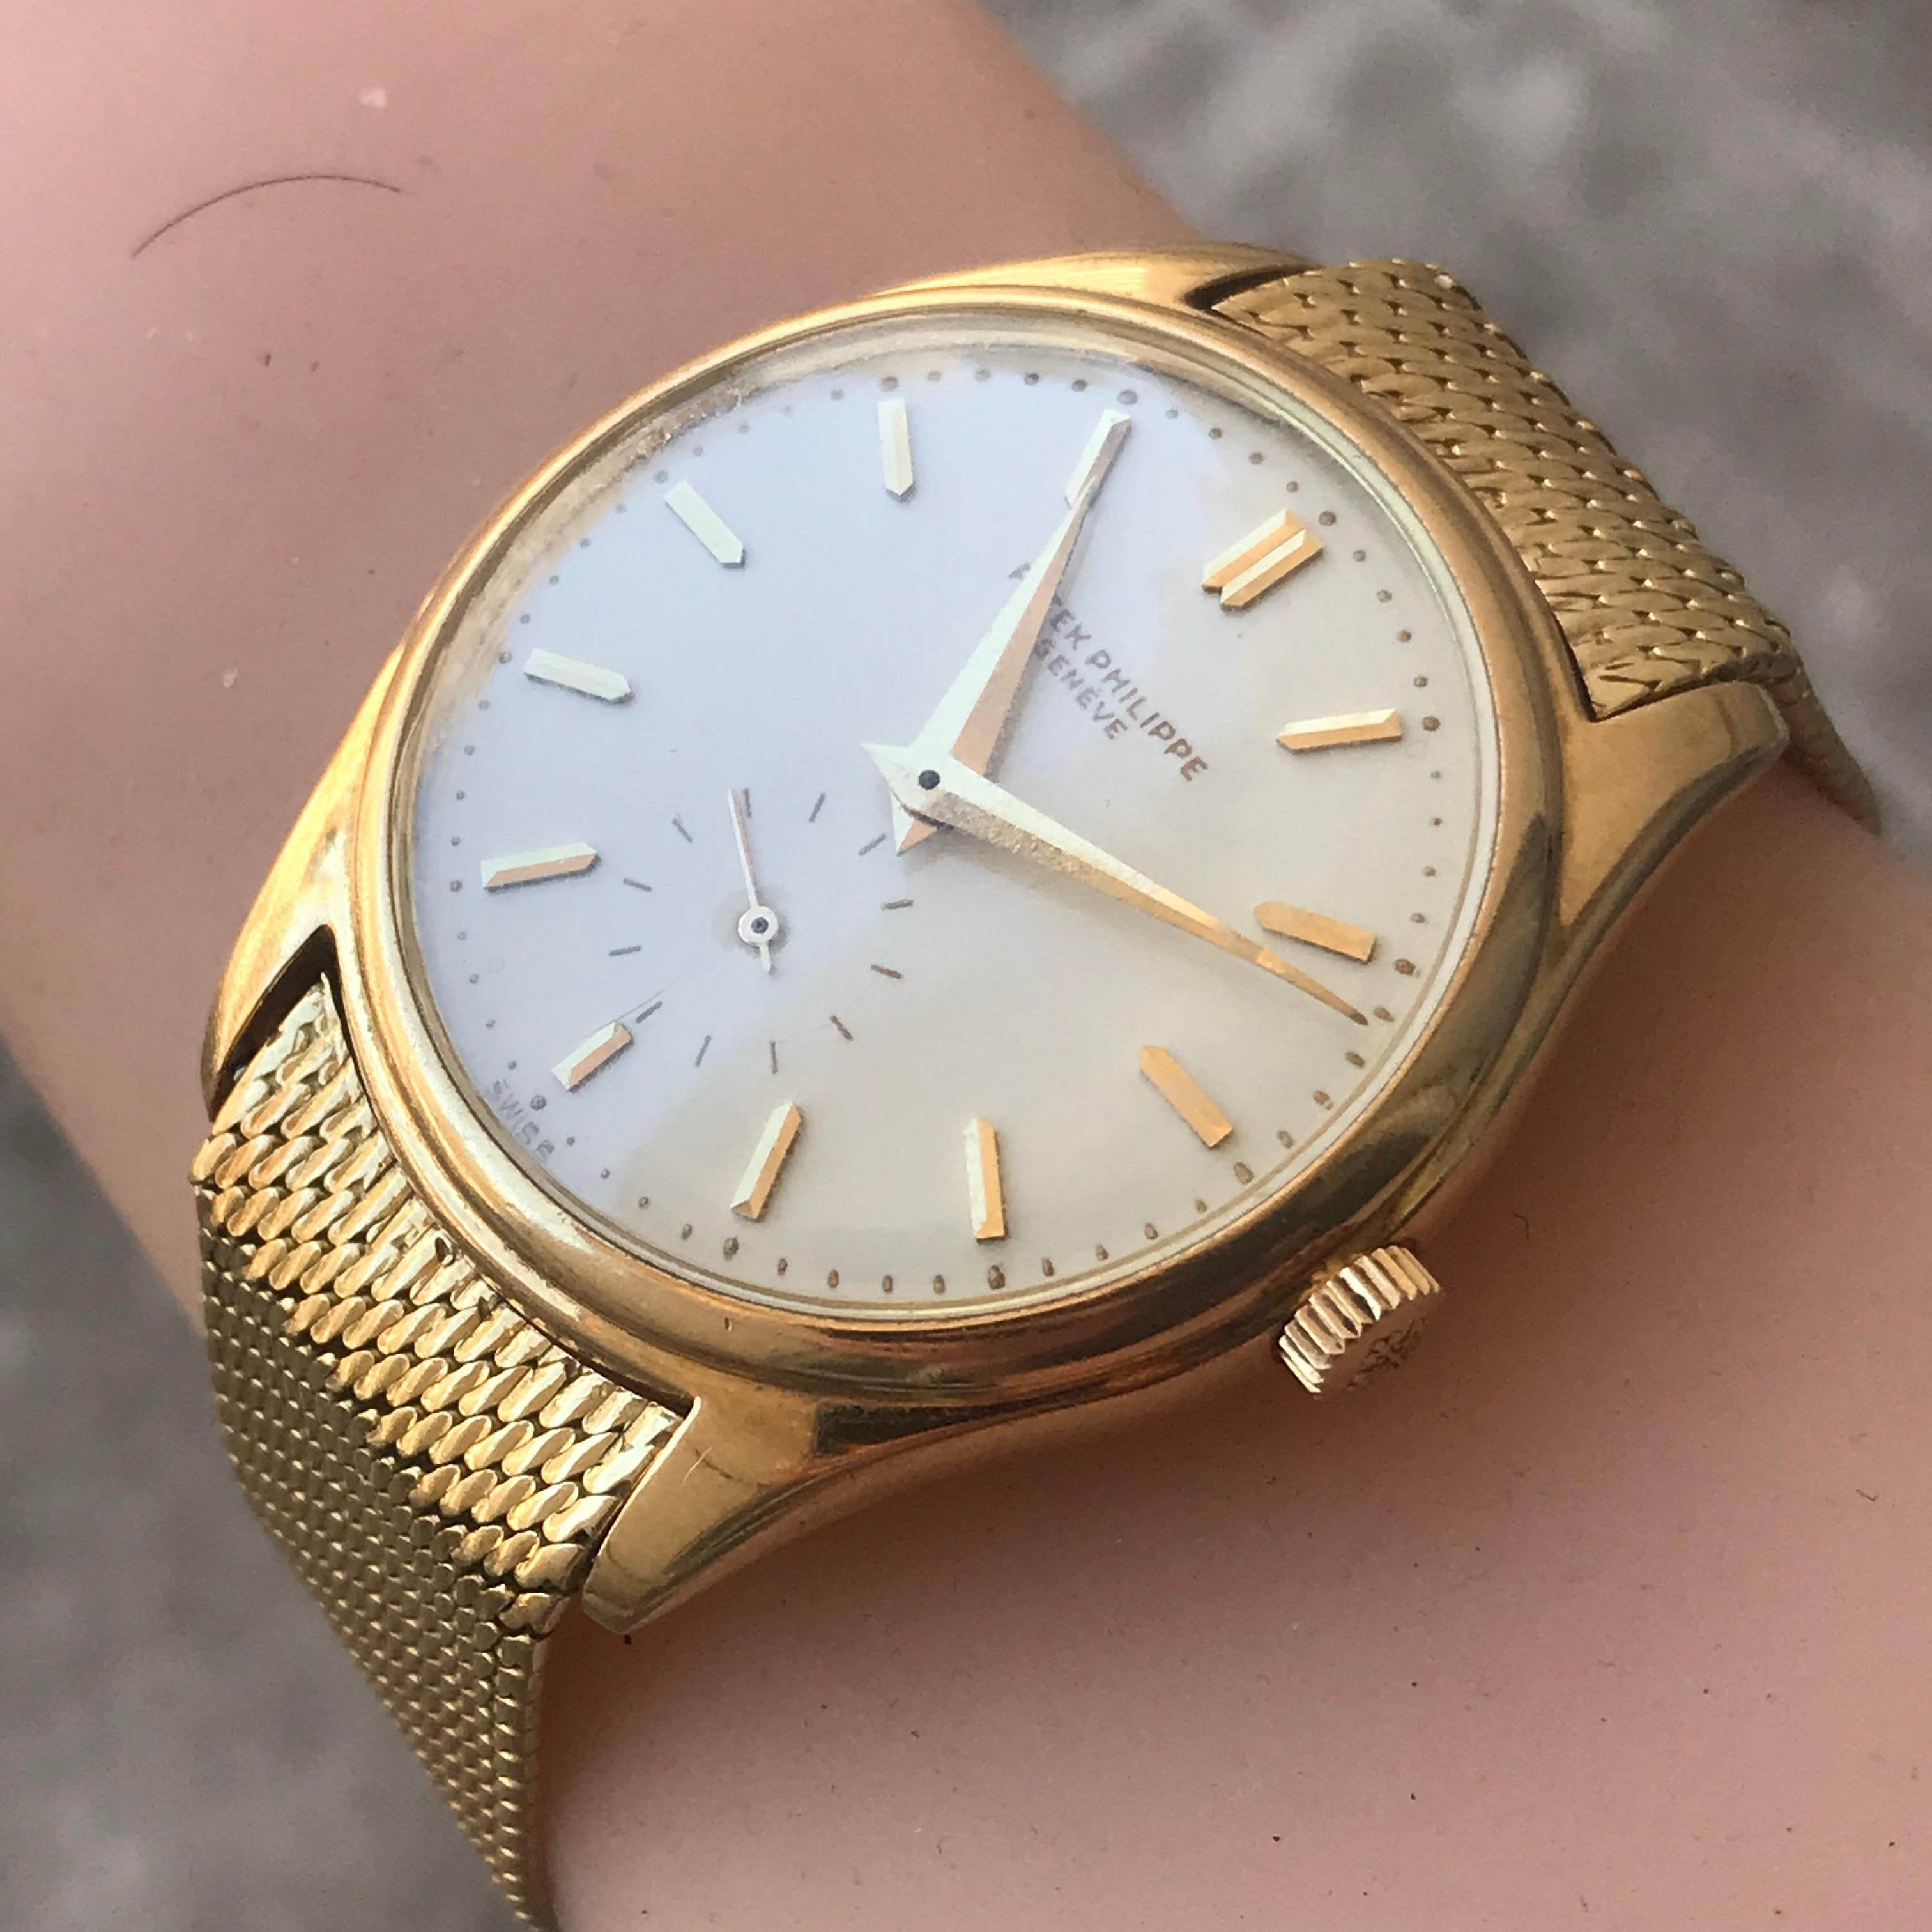 elling a Excellent Condition Patek Philippe Mens 2526 18k Yellow 1st Automatic Movement

It will come with the Patek Archive Papers, that verify the year made, serial #, case #, movement. In the picture of the archive papers I have blocked out some